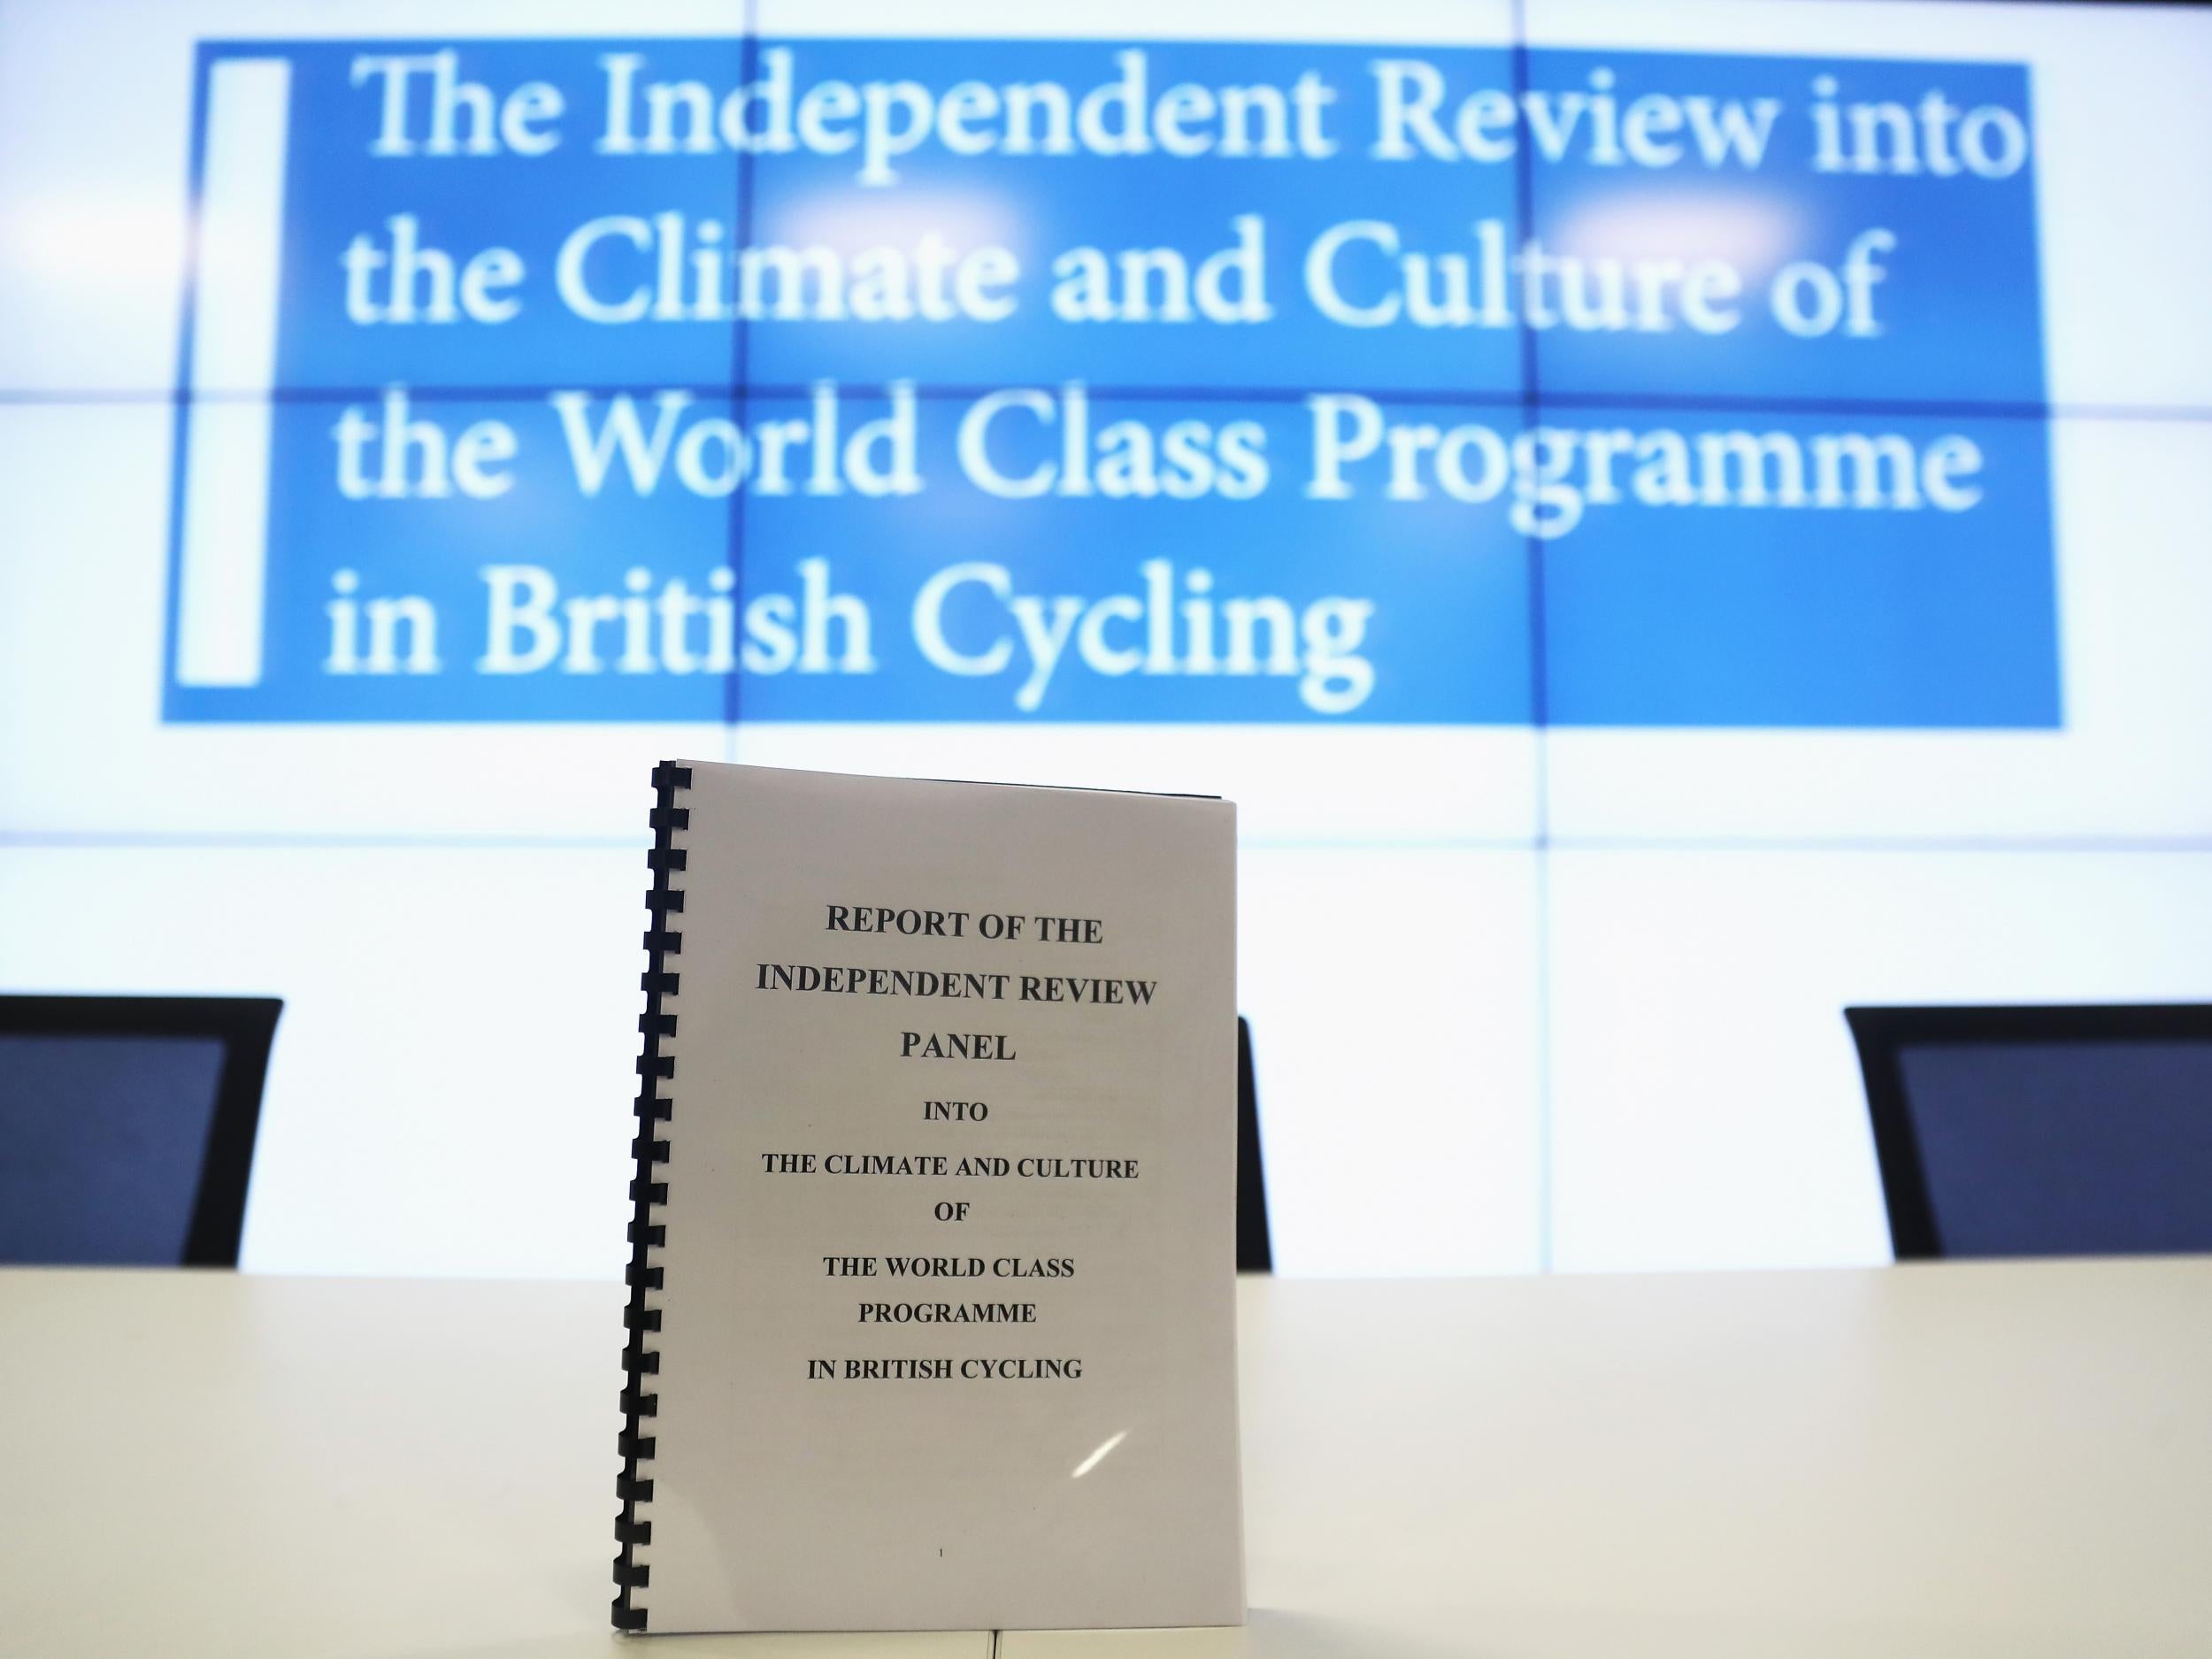 The report of the independent review into the culture and climate of British Cycling